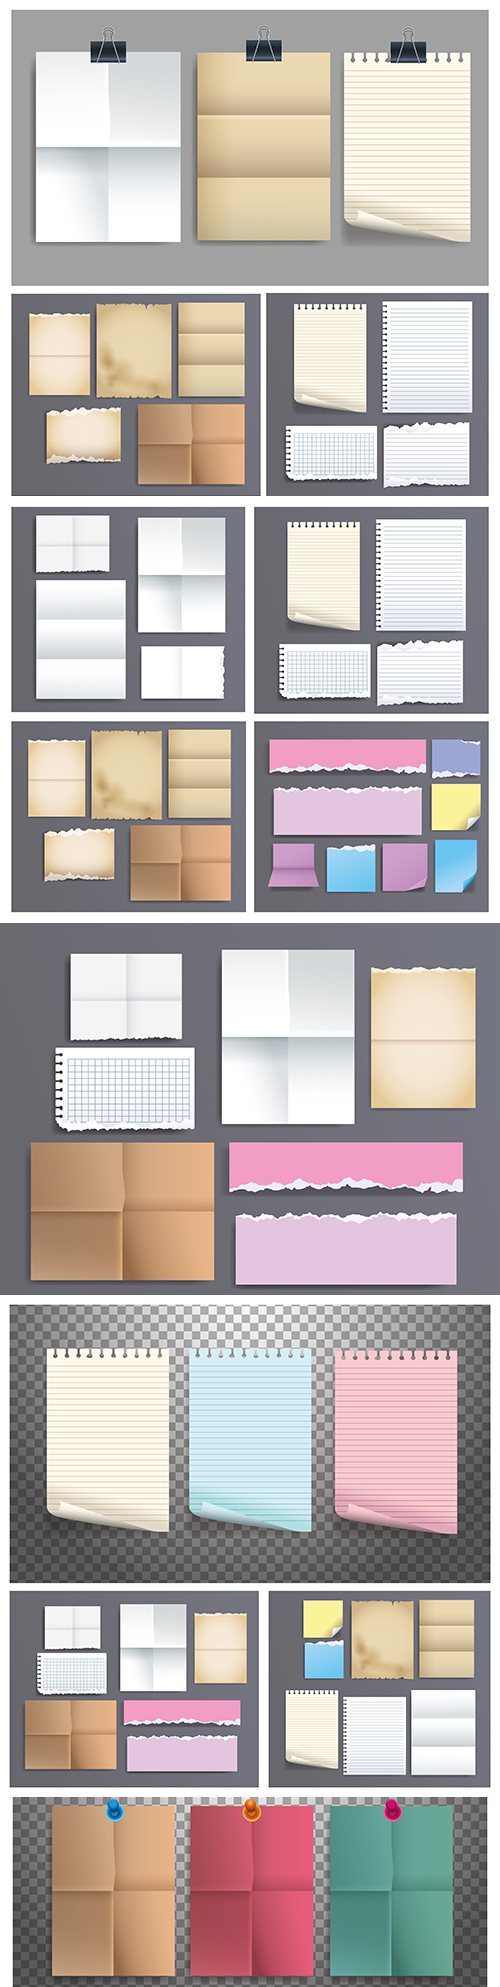 Notebook sheet and paper icon banners design
